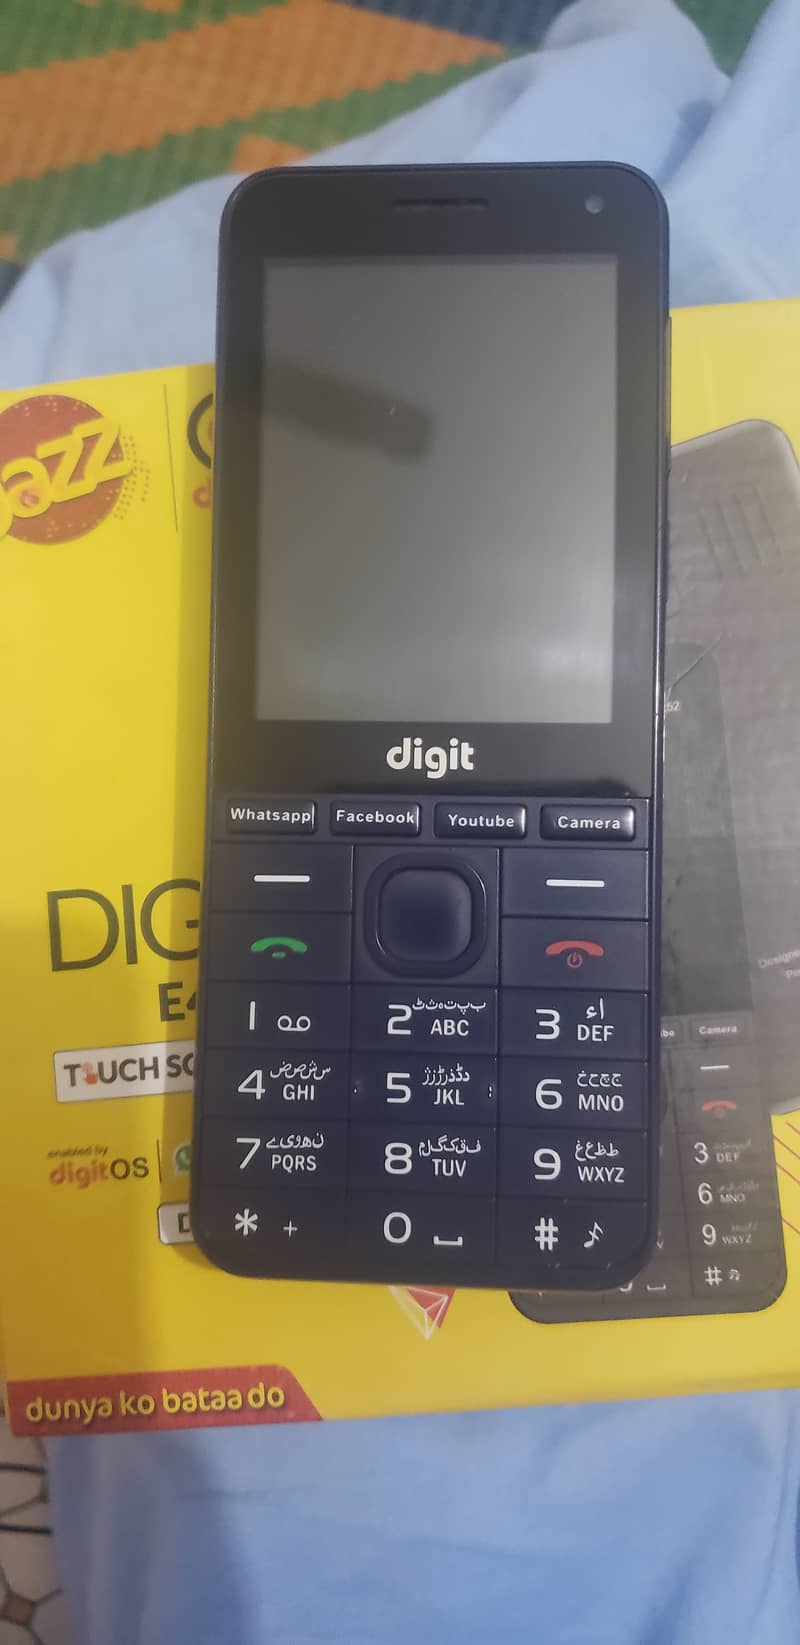 Jazz digit e4 pro 10/9.5 condition with box and 7 months warranty 9